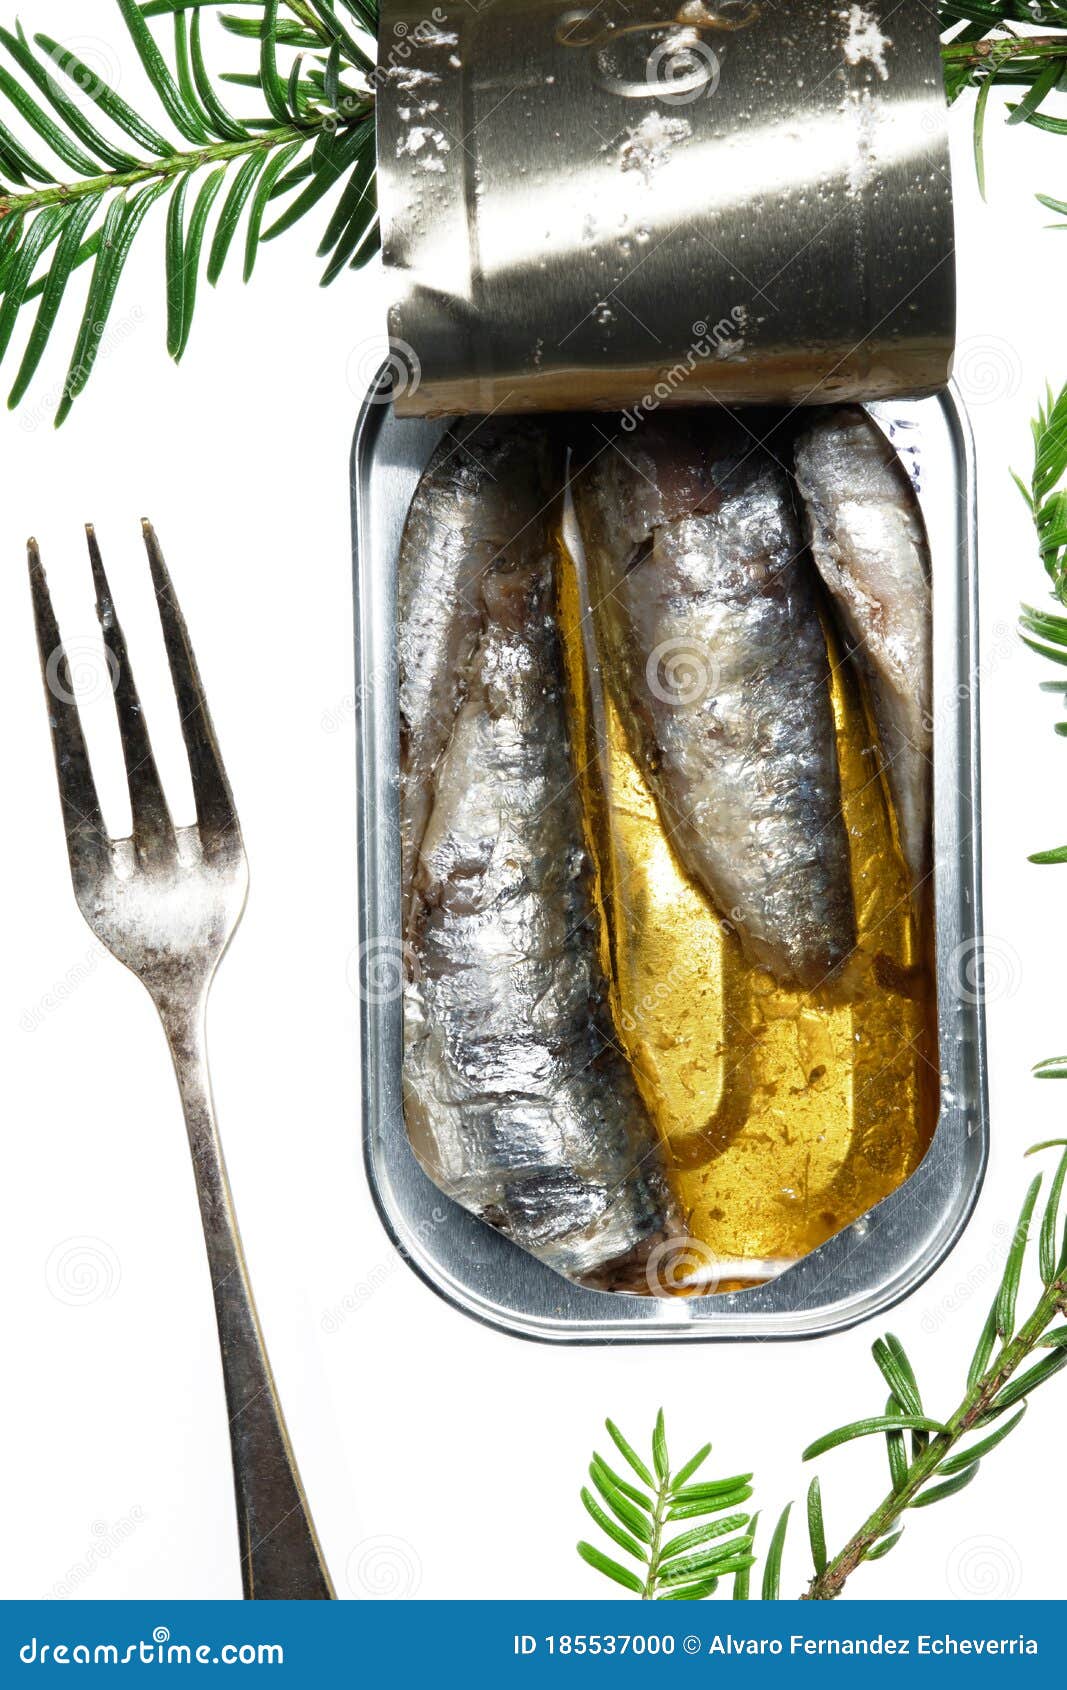 Can of sardines in oil stock photo. Image of tinned ...